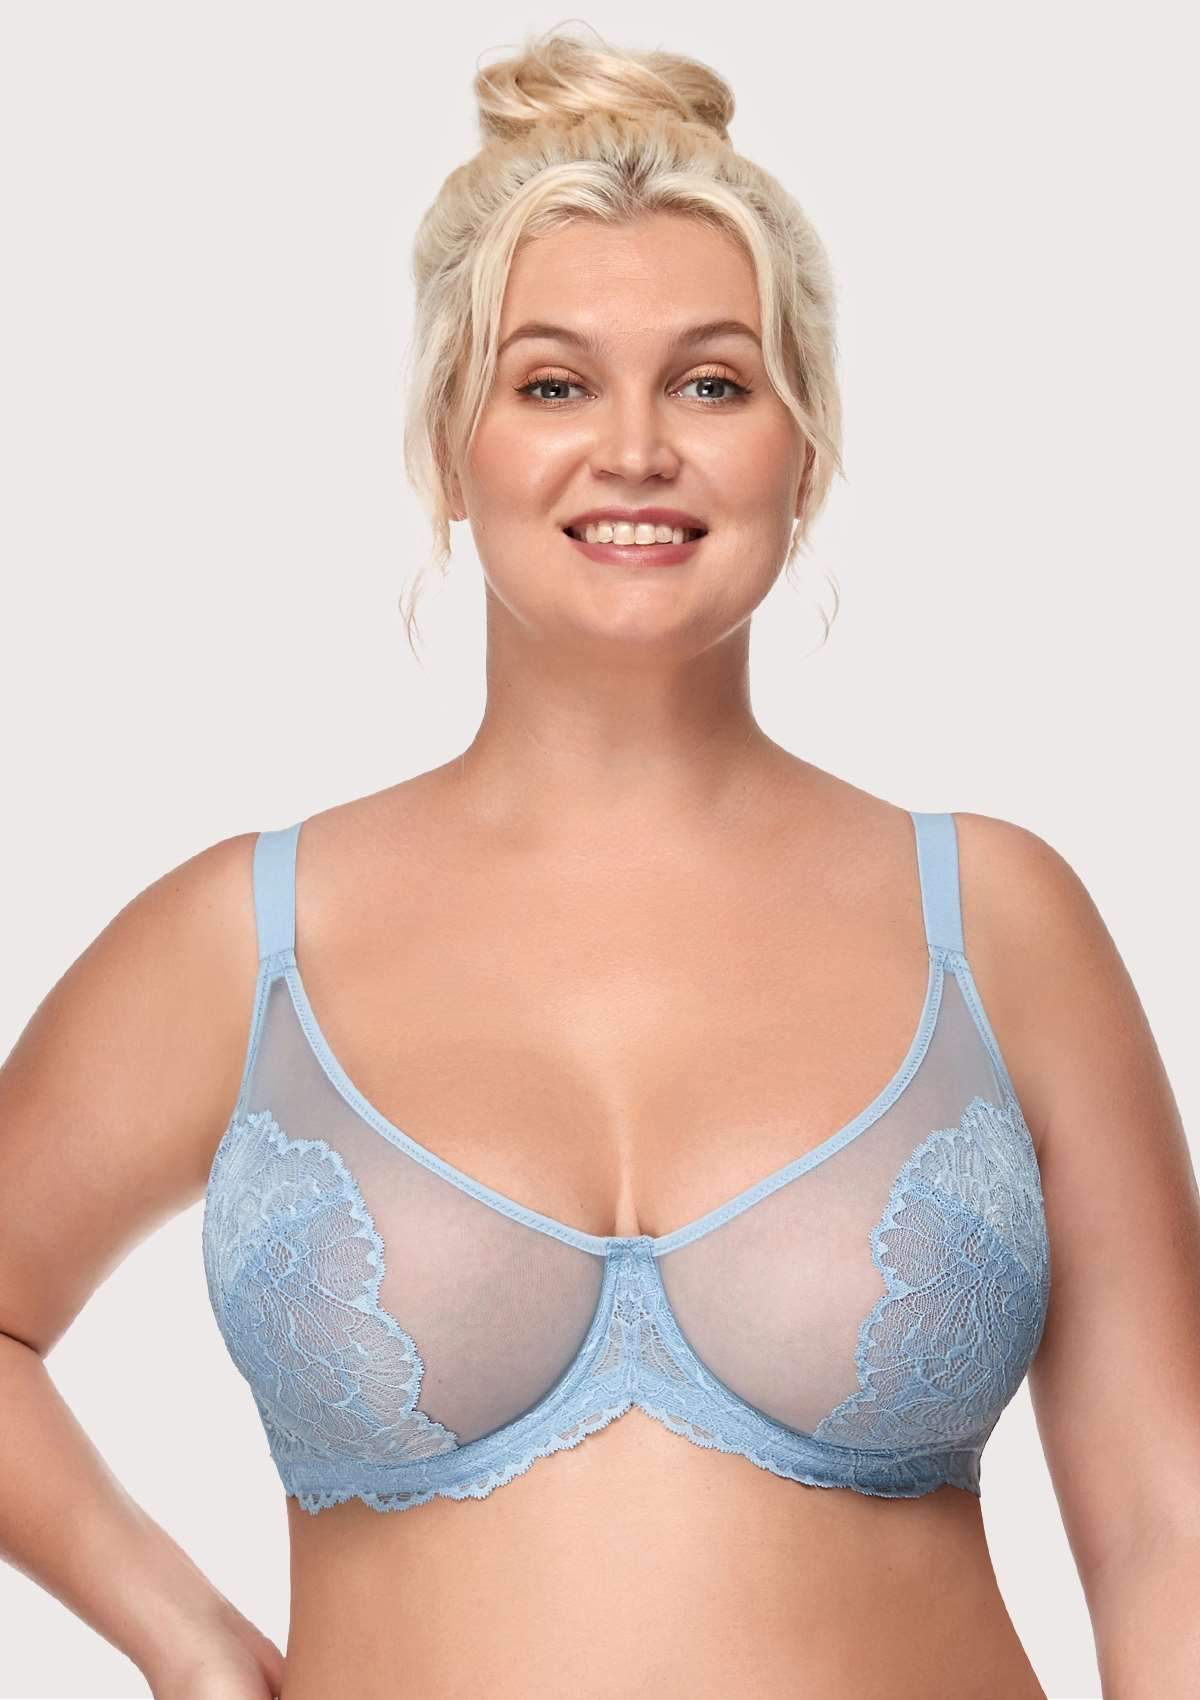 HSIA Blossom Full Coverage Supportive Unlined Underwire Bra Set - Storm Blue / 34 / C